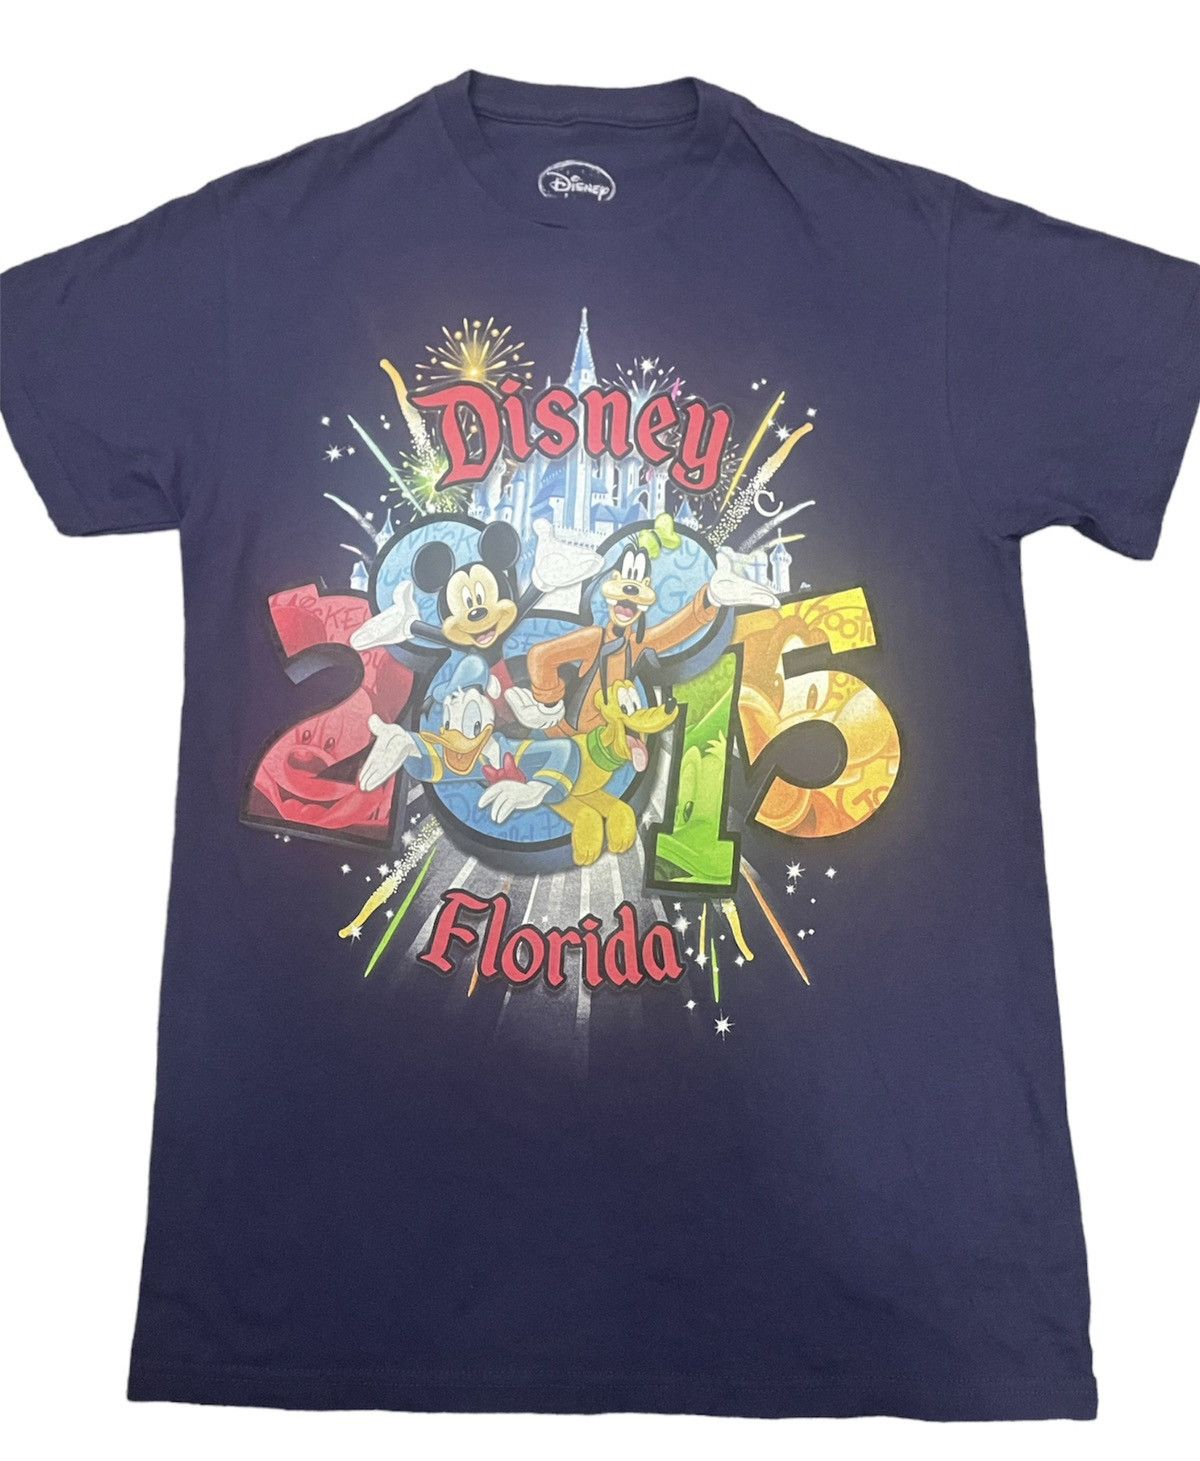 Mickey Mouse Disney world florida mickey mouse 2015 graphic t-shirt Size US S / EU 44-46 / 1 - 1 Preview